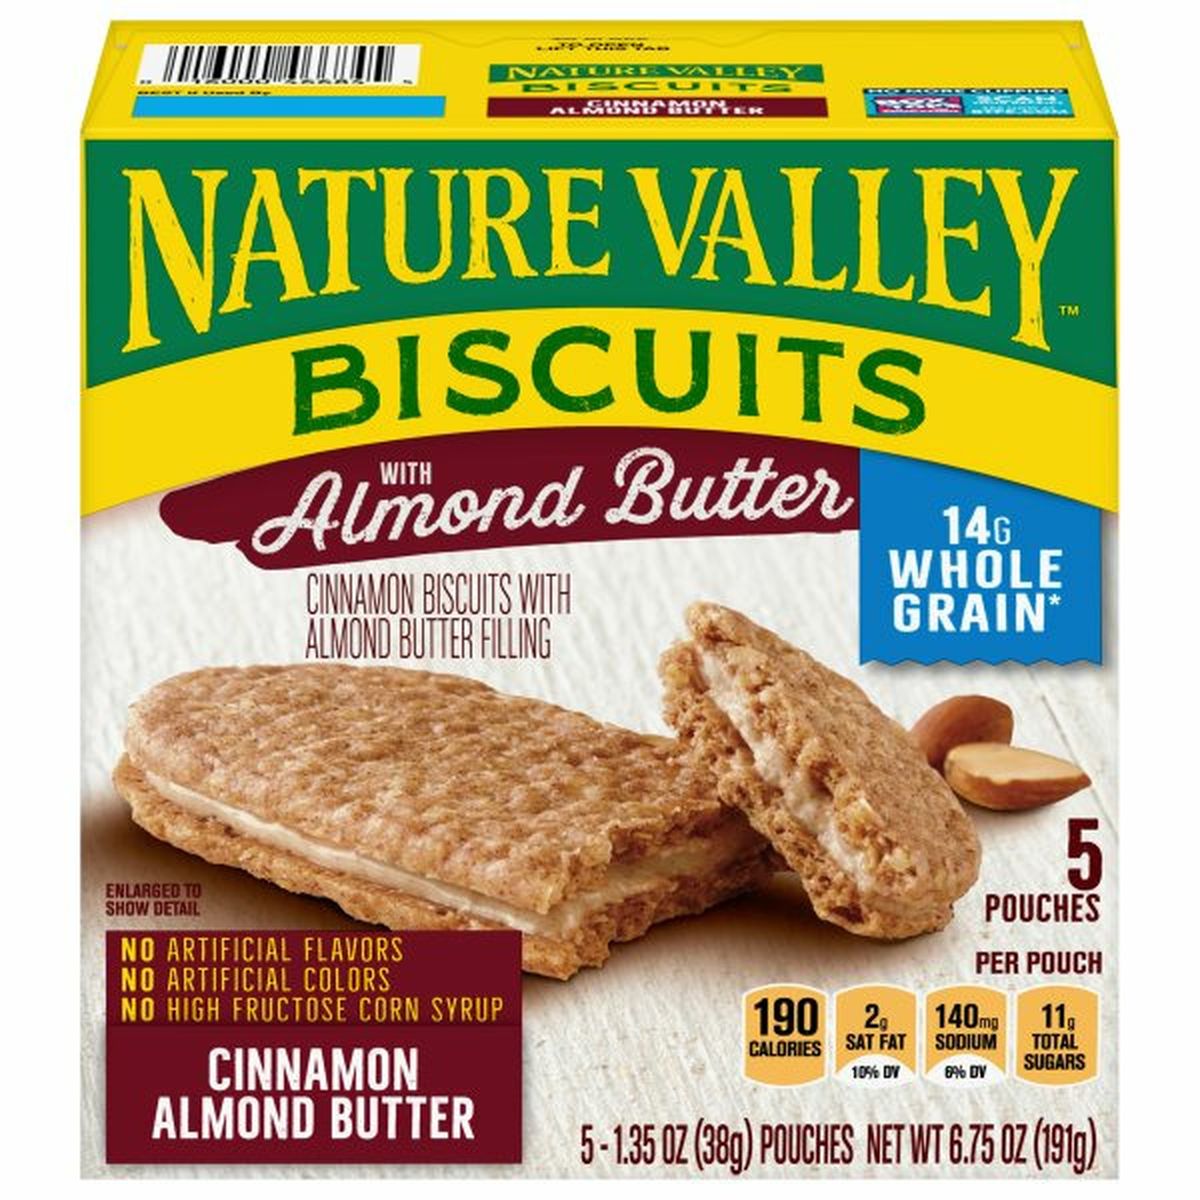 Calories in Nature Valley Biscuits, Cinnamon Almond Butter